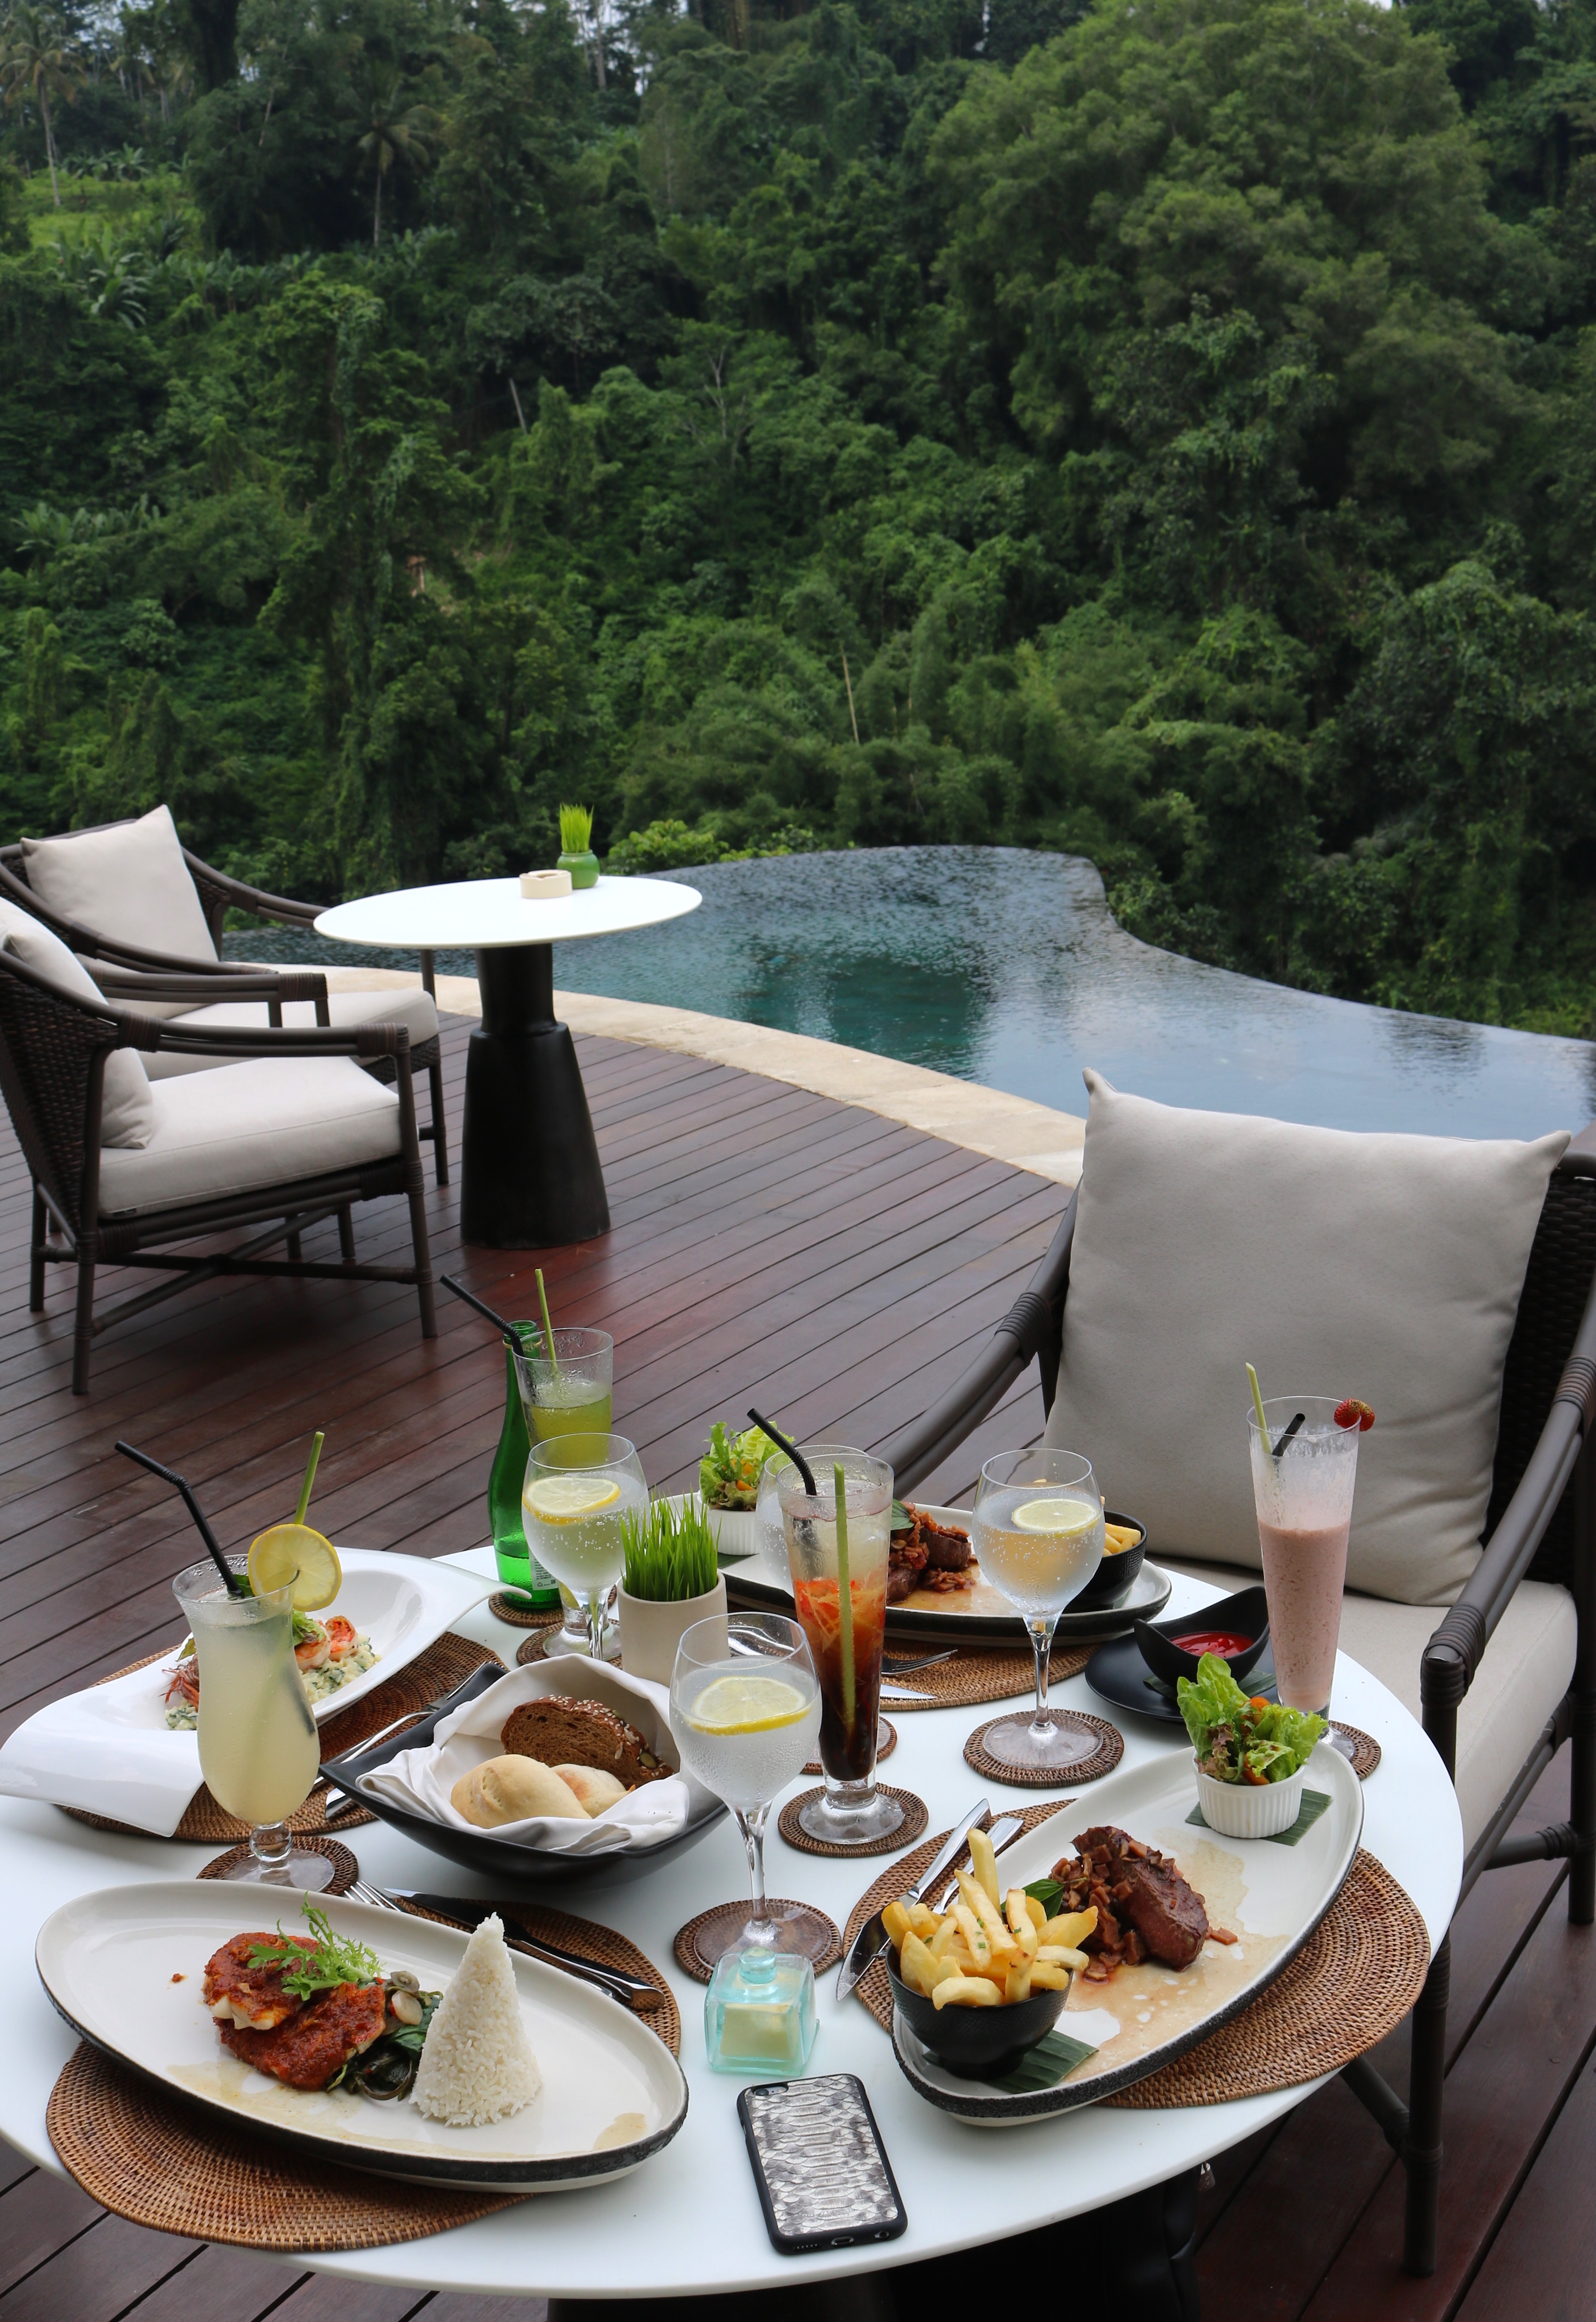 Lunch at The Hanging Gardens of Bali